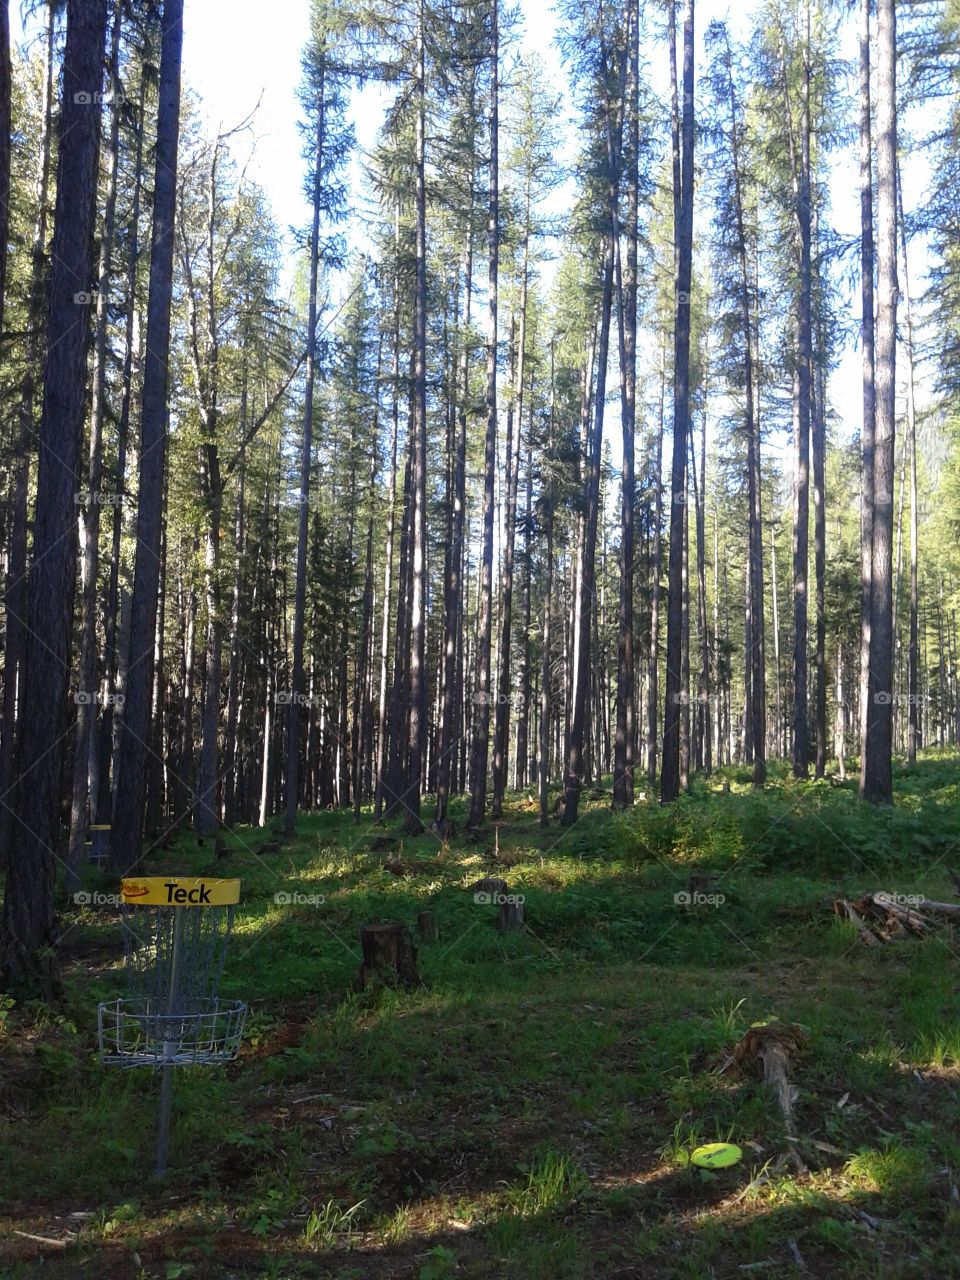 Disc golf in the BC forest